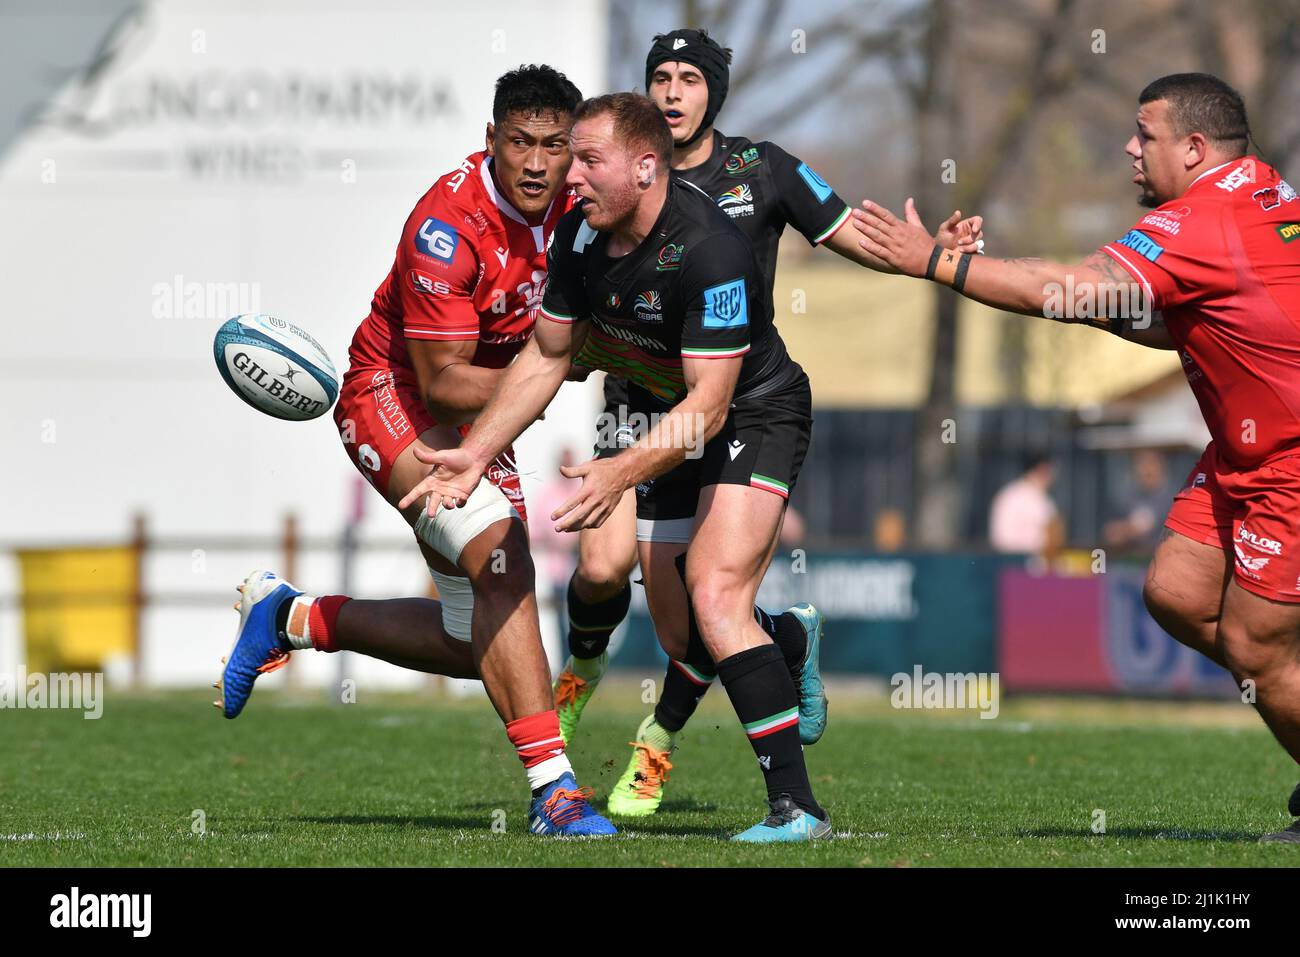 Parma, Italia. 26th Mar, 2022. giulio bisegni (zebre) durante Zebre Rugby Club vs Scarlets, United Rugby Championship match a Parma, Italy, March 26 2022 Credit: Independent Photo Agency/Alamy Live News Foto Stock